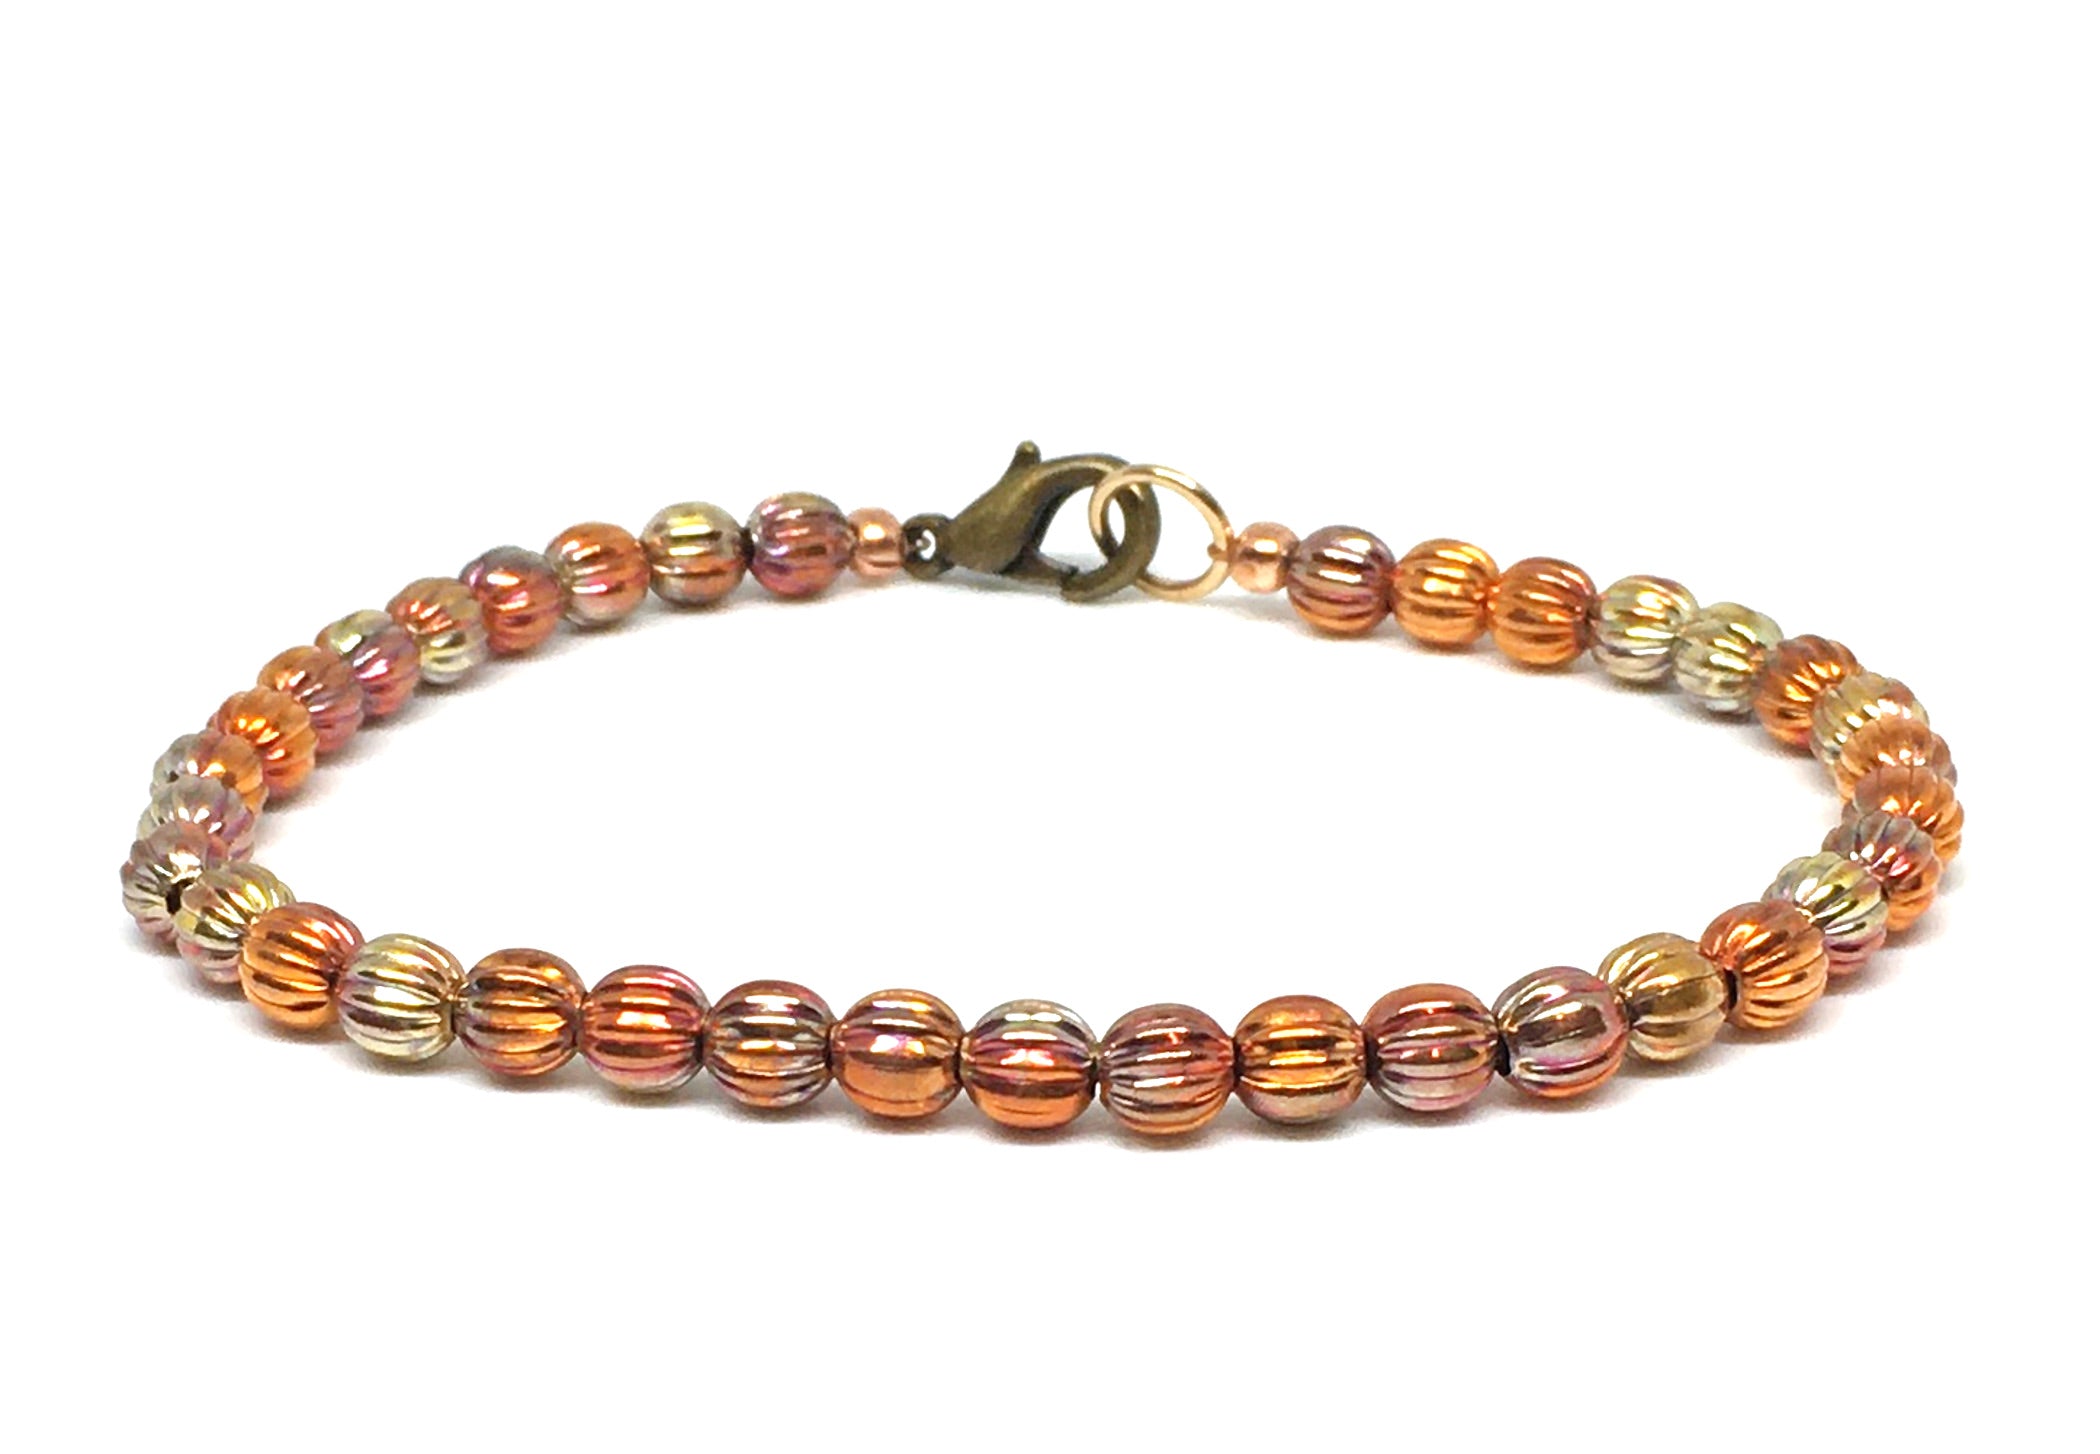 Sonoran Sunset Flame Painted Corrugated Copper Bead Bracelet - Small